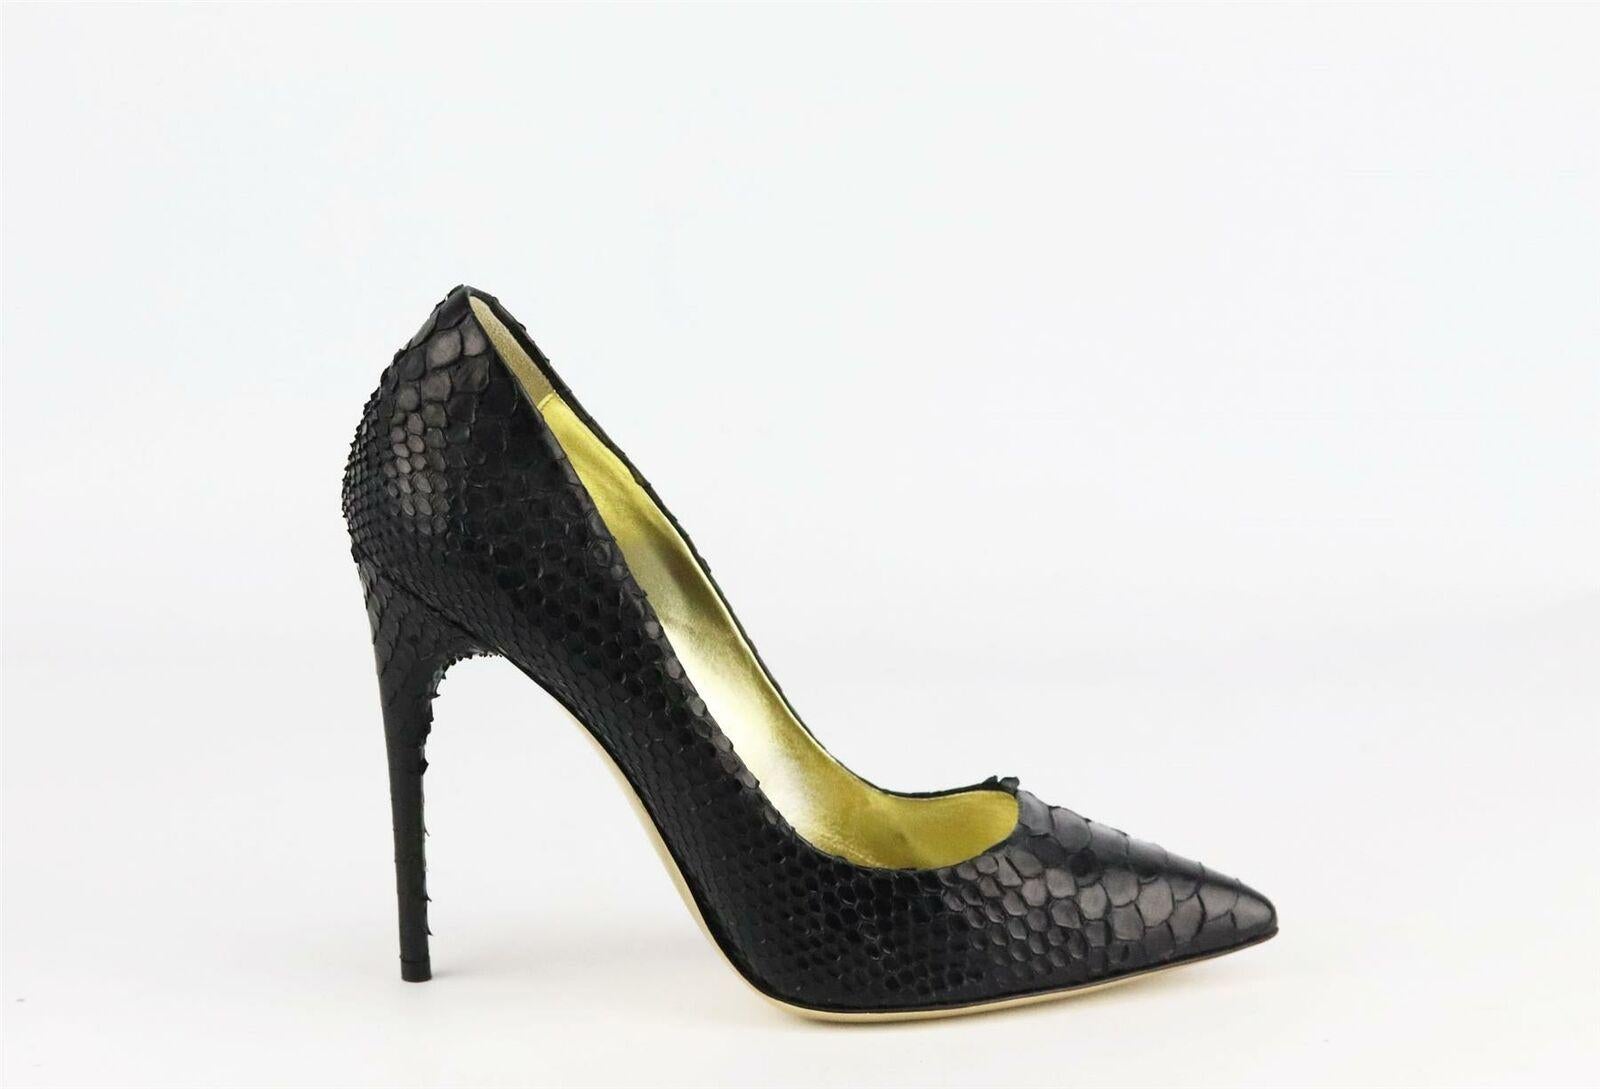 These pumps by Tom Ford have been made in Italy from black python and has elongated pointed toes, they're finished with the brand’s signature gold sole.
Heel measures approximately 101 mm/ 4 inches.
Black python.
Slip on.
Does not come with box or